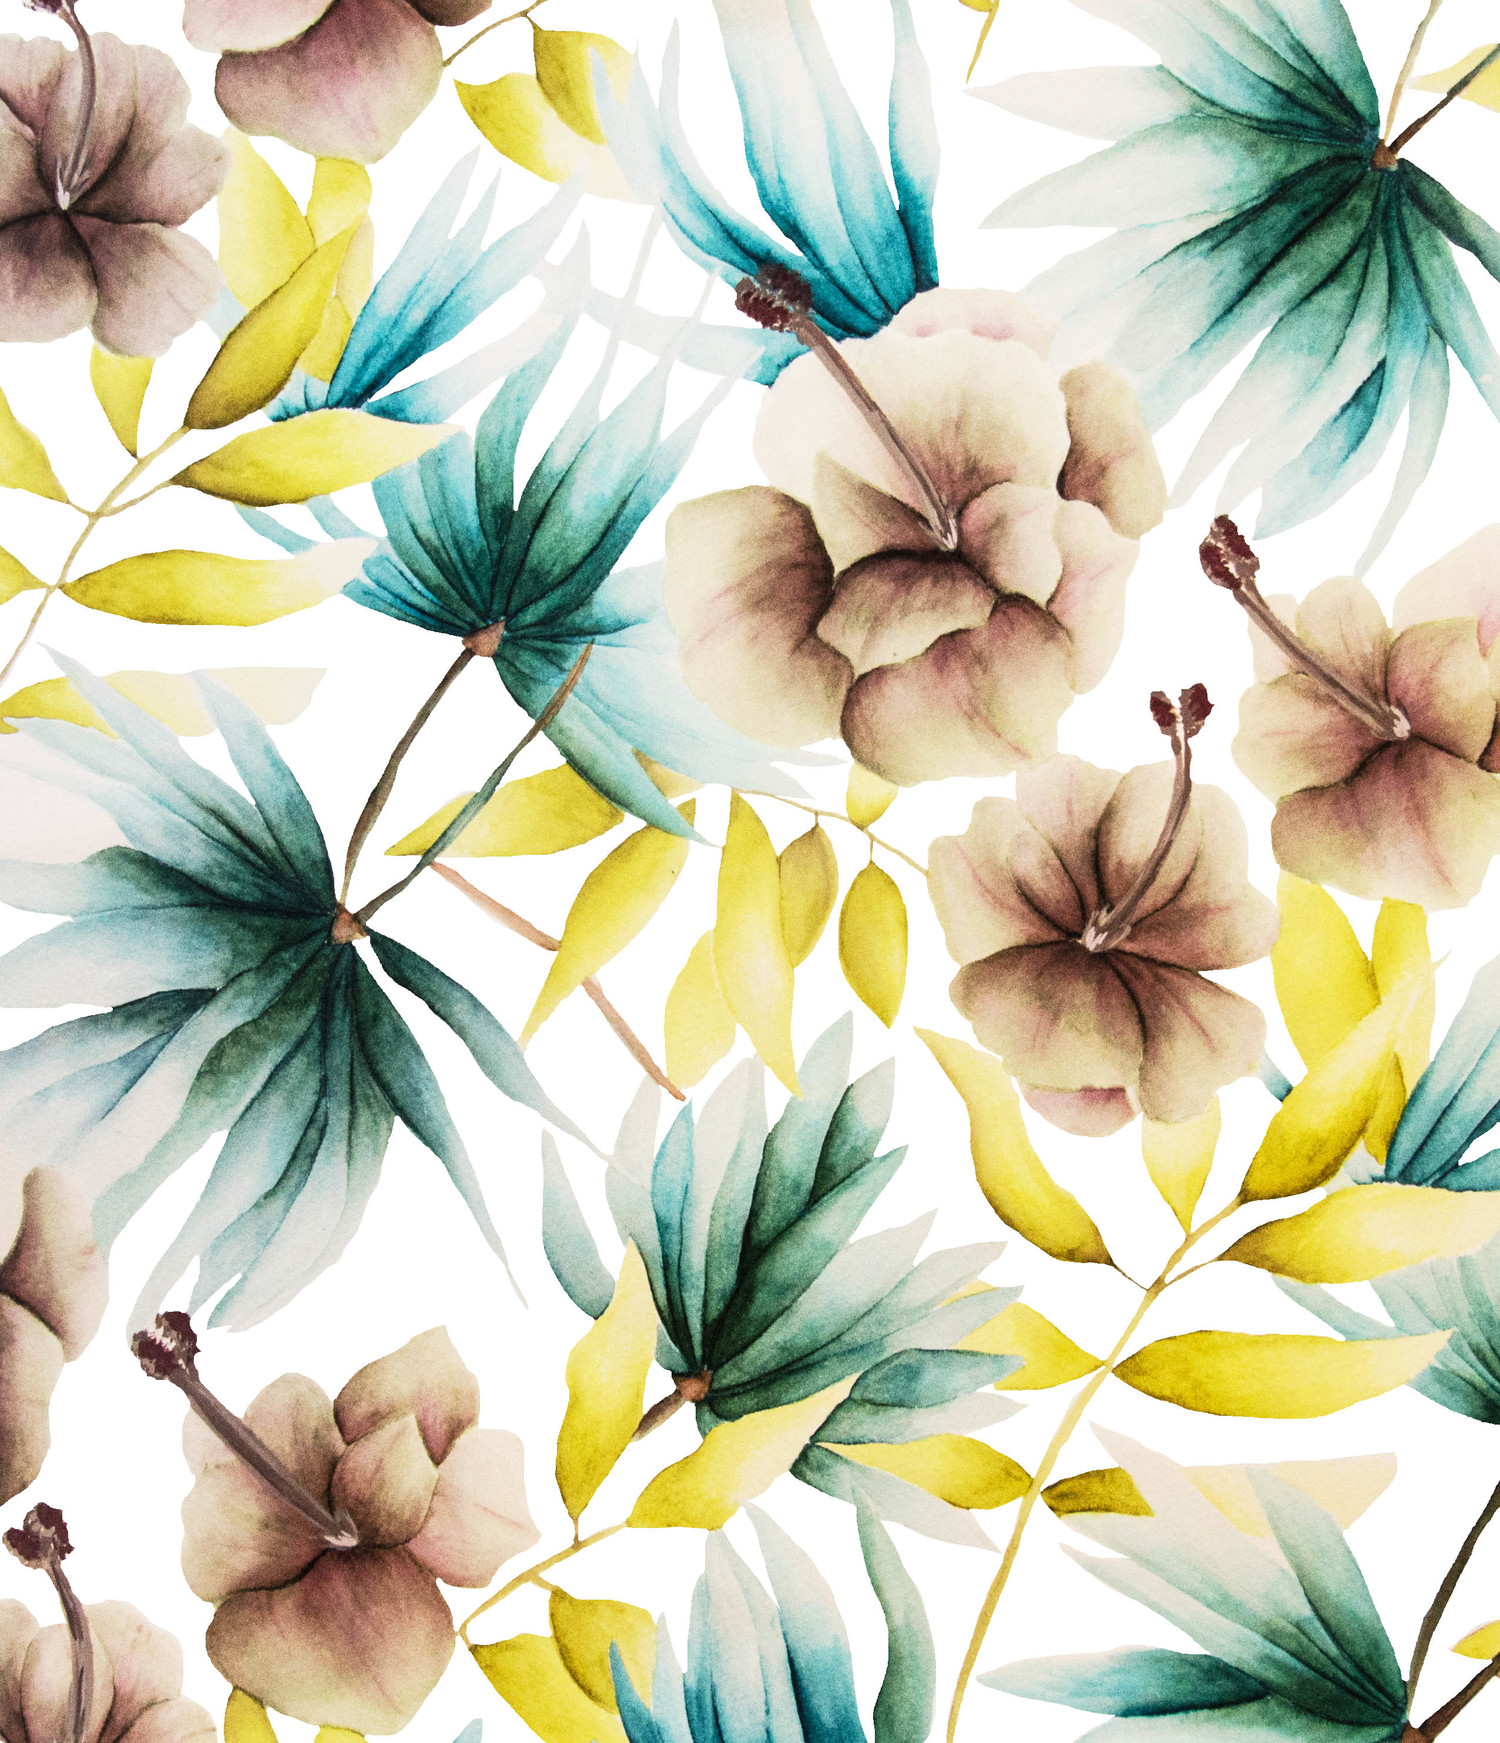 Kaye’s “Exotic” design for her Summer Collection includes a hint of an aquatic plant we particularly love — water lilies. “I love putting together combination of various flowers I love, in soft, but striking, hues and shapes,” says Kaye.